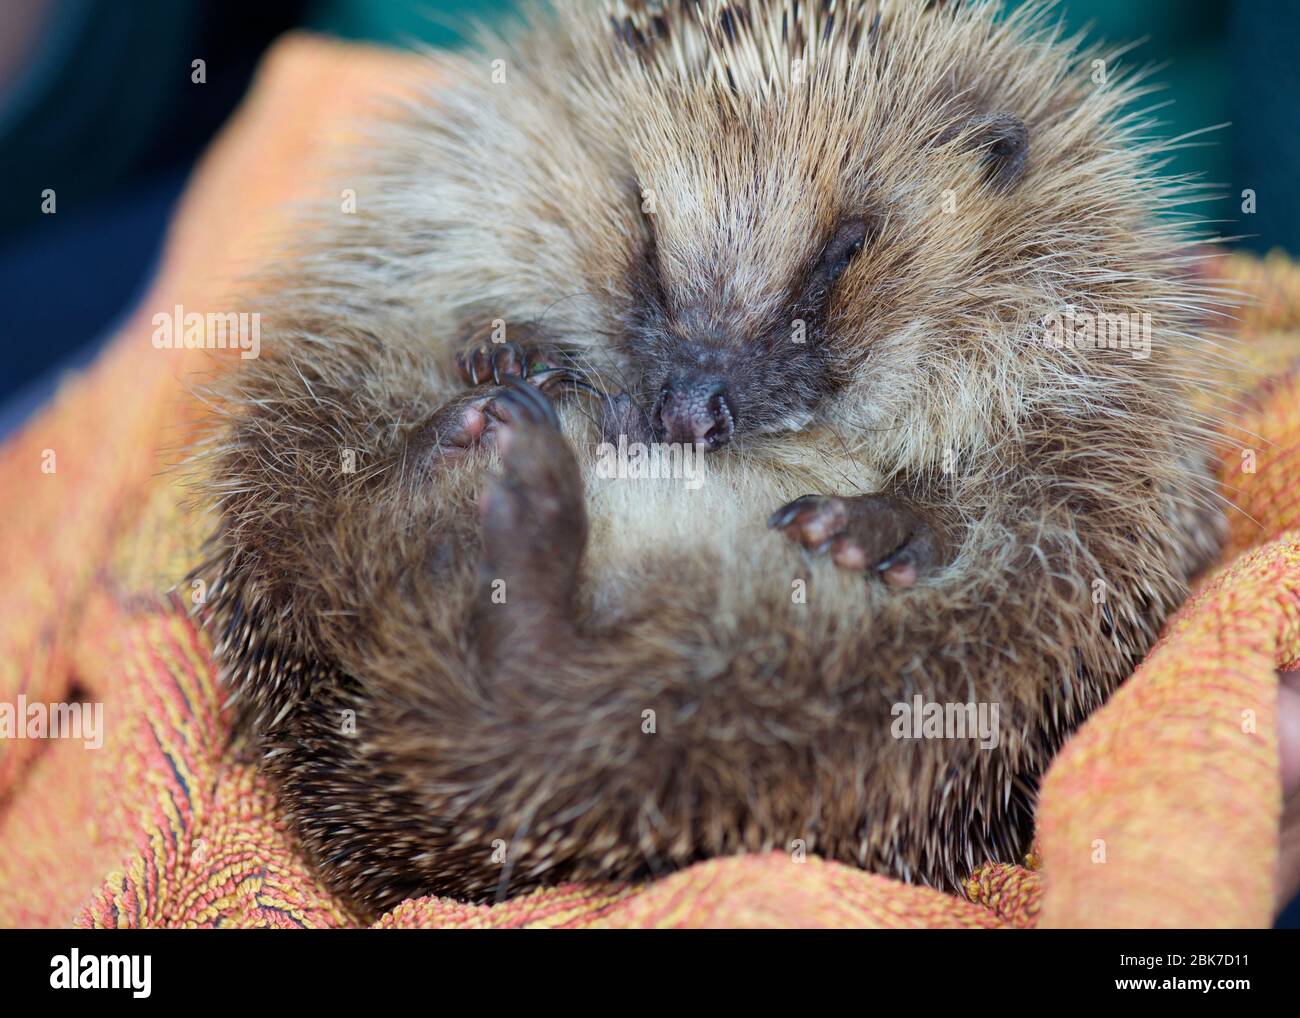 tiny baby rescued hedgehog on his back being held   selective focus  room for copy space in the background Stock Photo